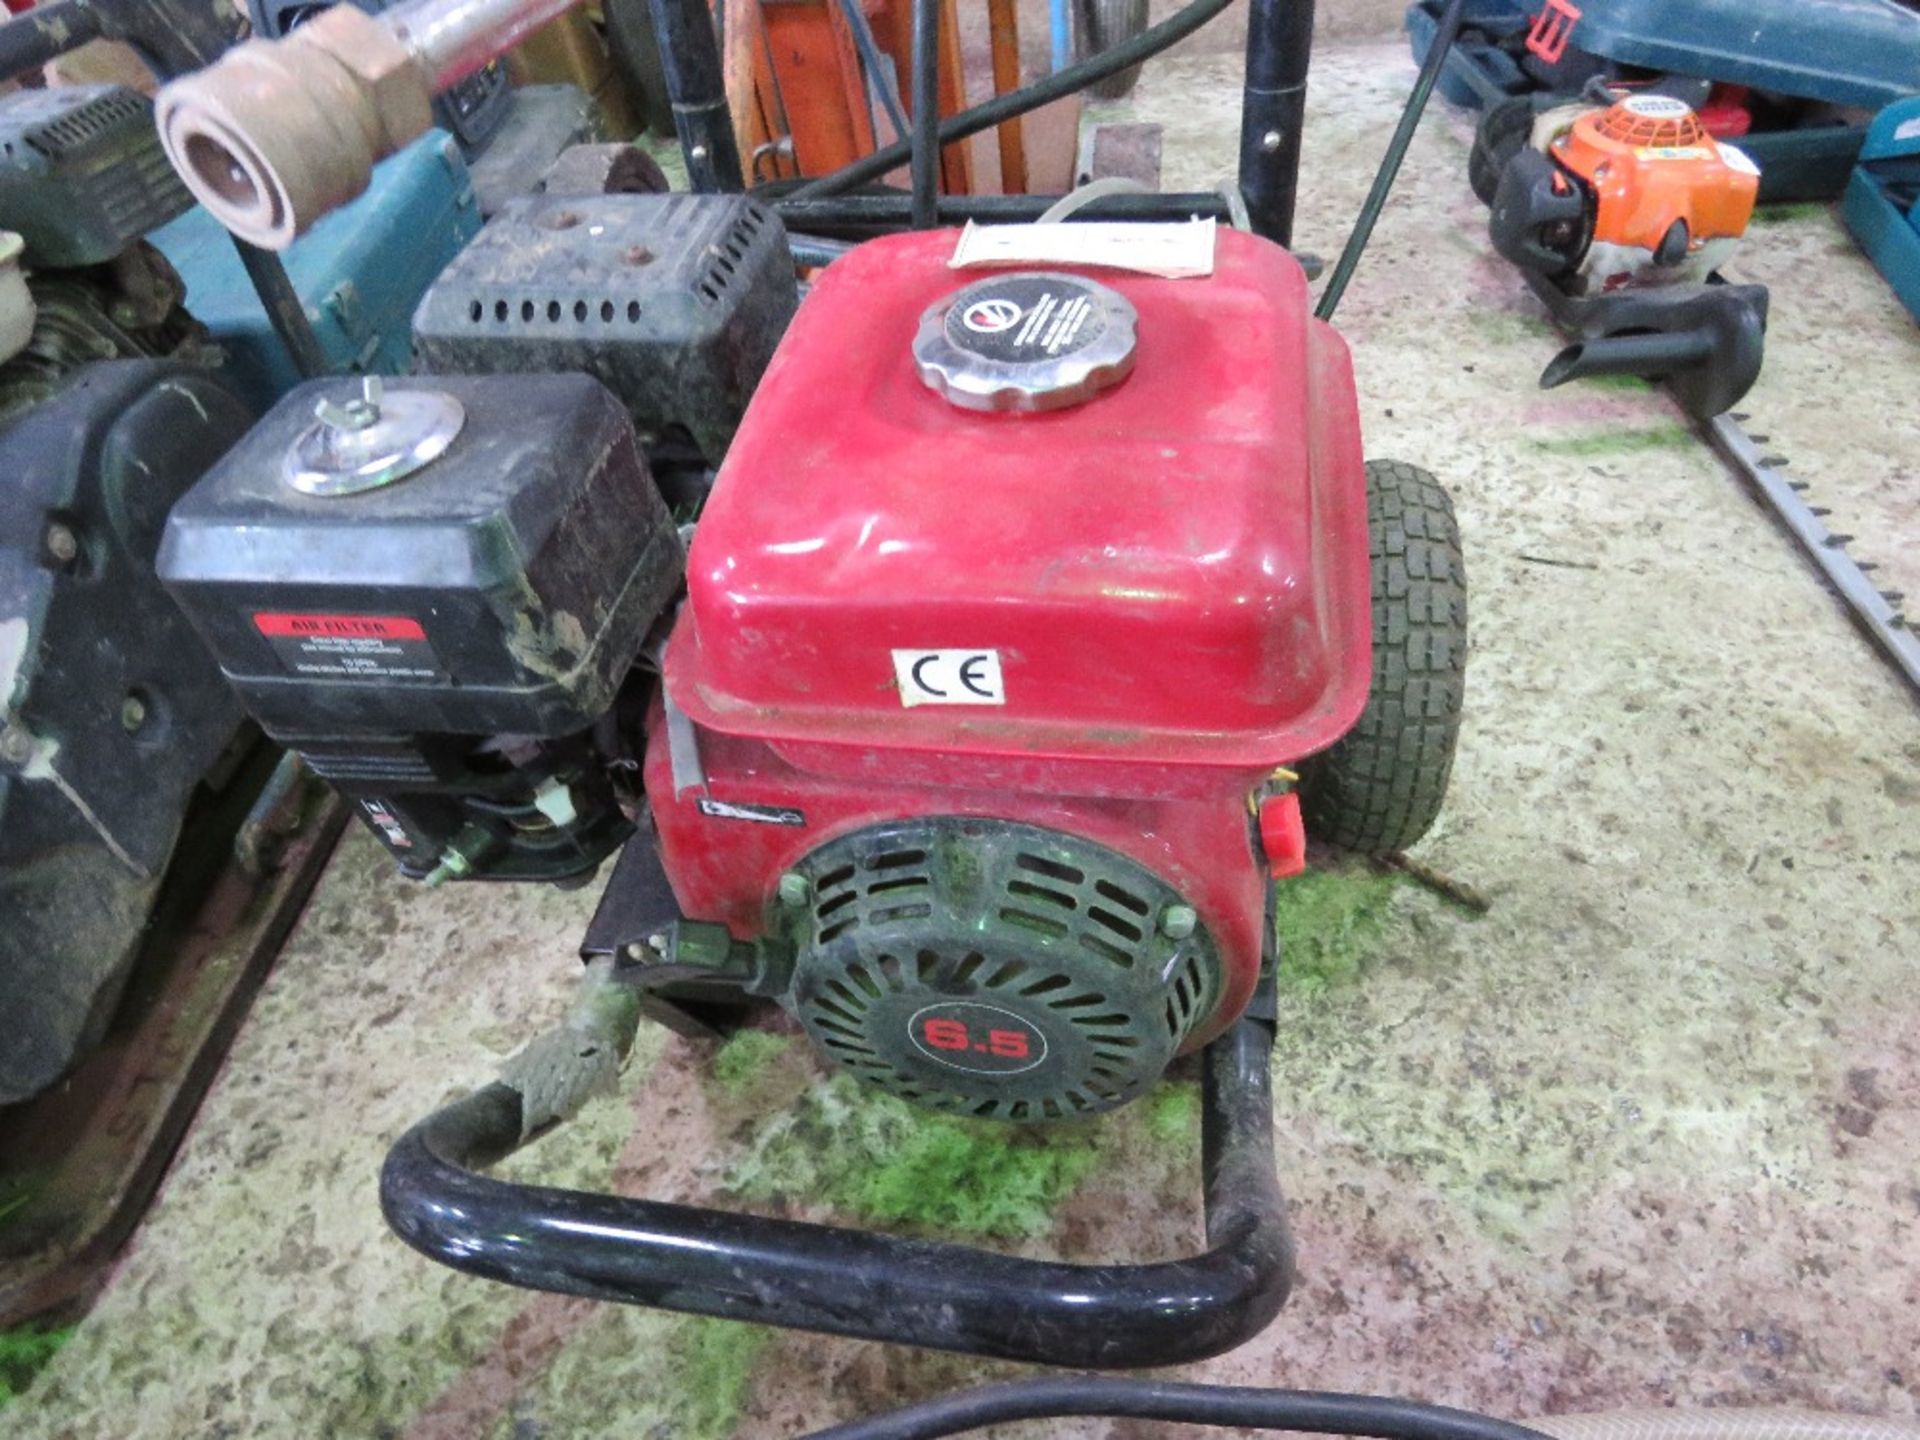 PETROL ENGINED PRESSURE WASHER.....THIS LOT IS SOLD UNDER THE AUCTIONEERS MARGIN SCHEME, THEREFORE N - Image 5 of 5